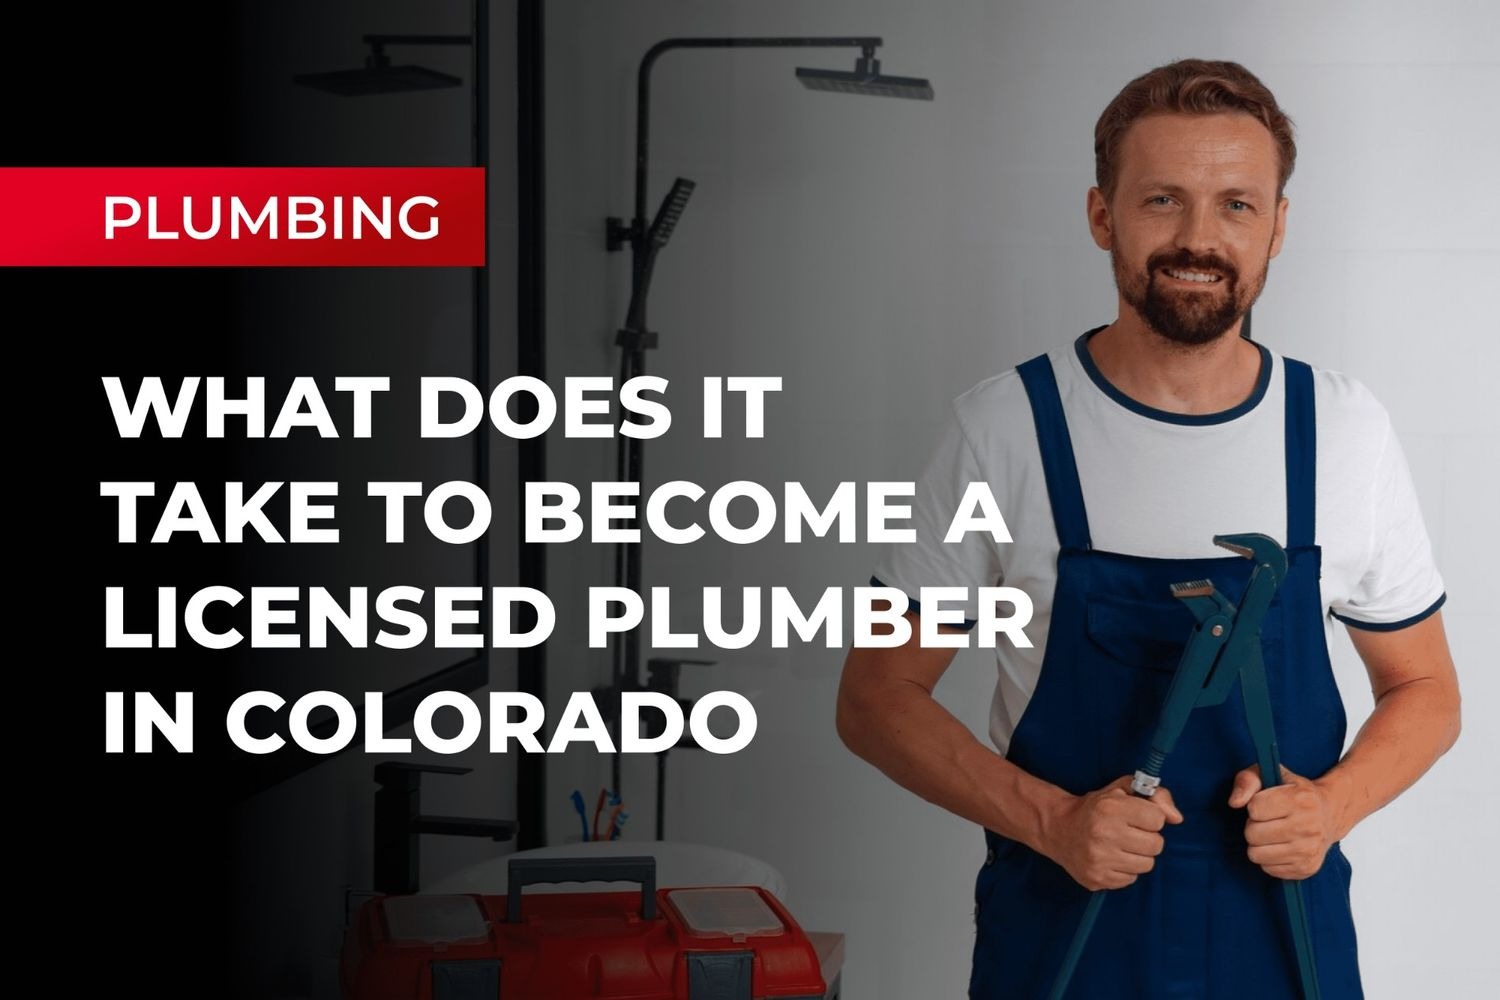 What Does It Take To Become a Licensed Plumber In Colorado?